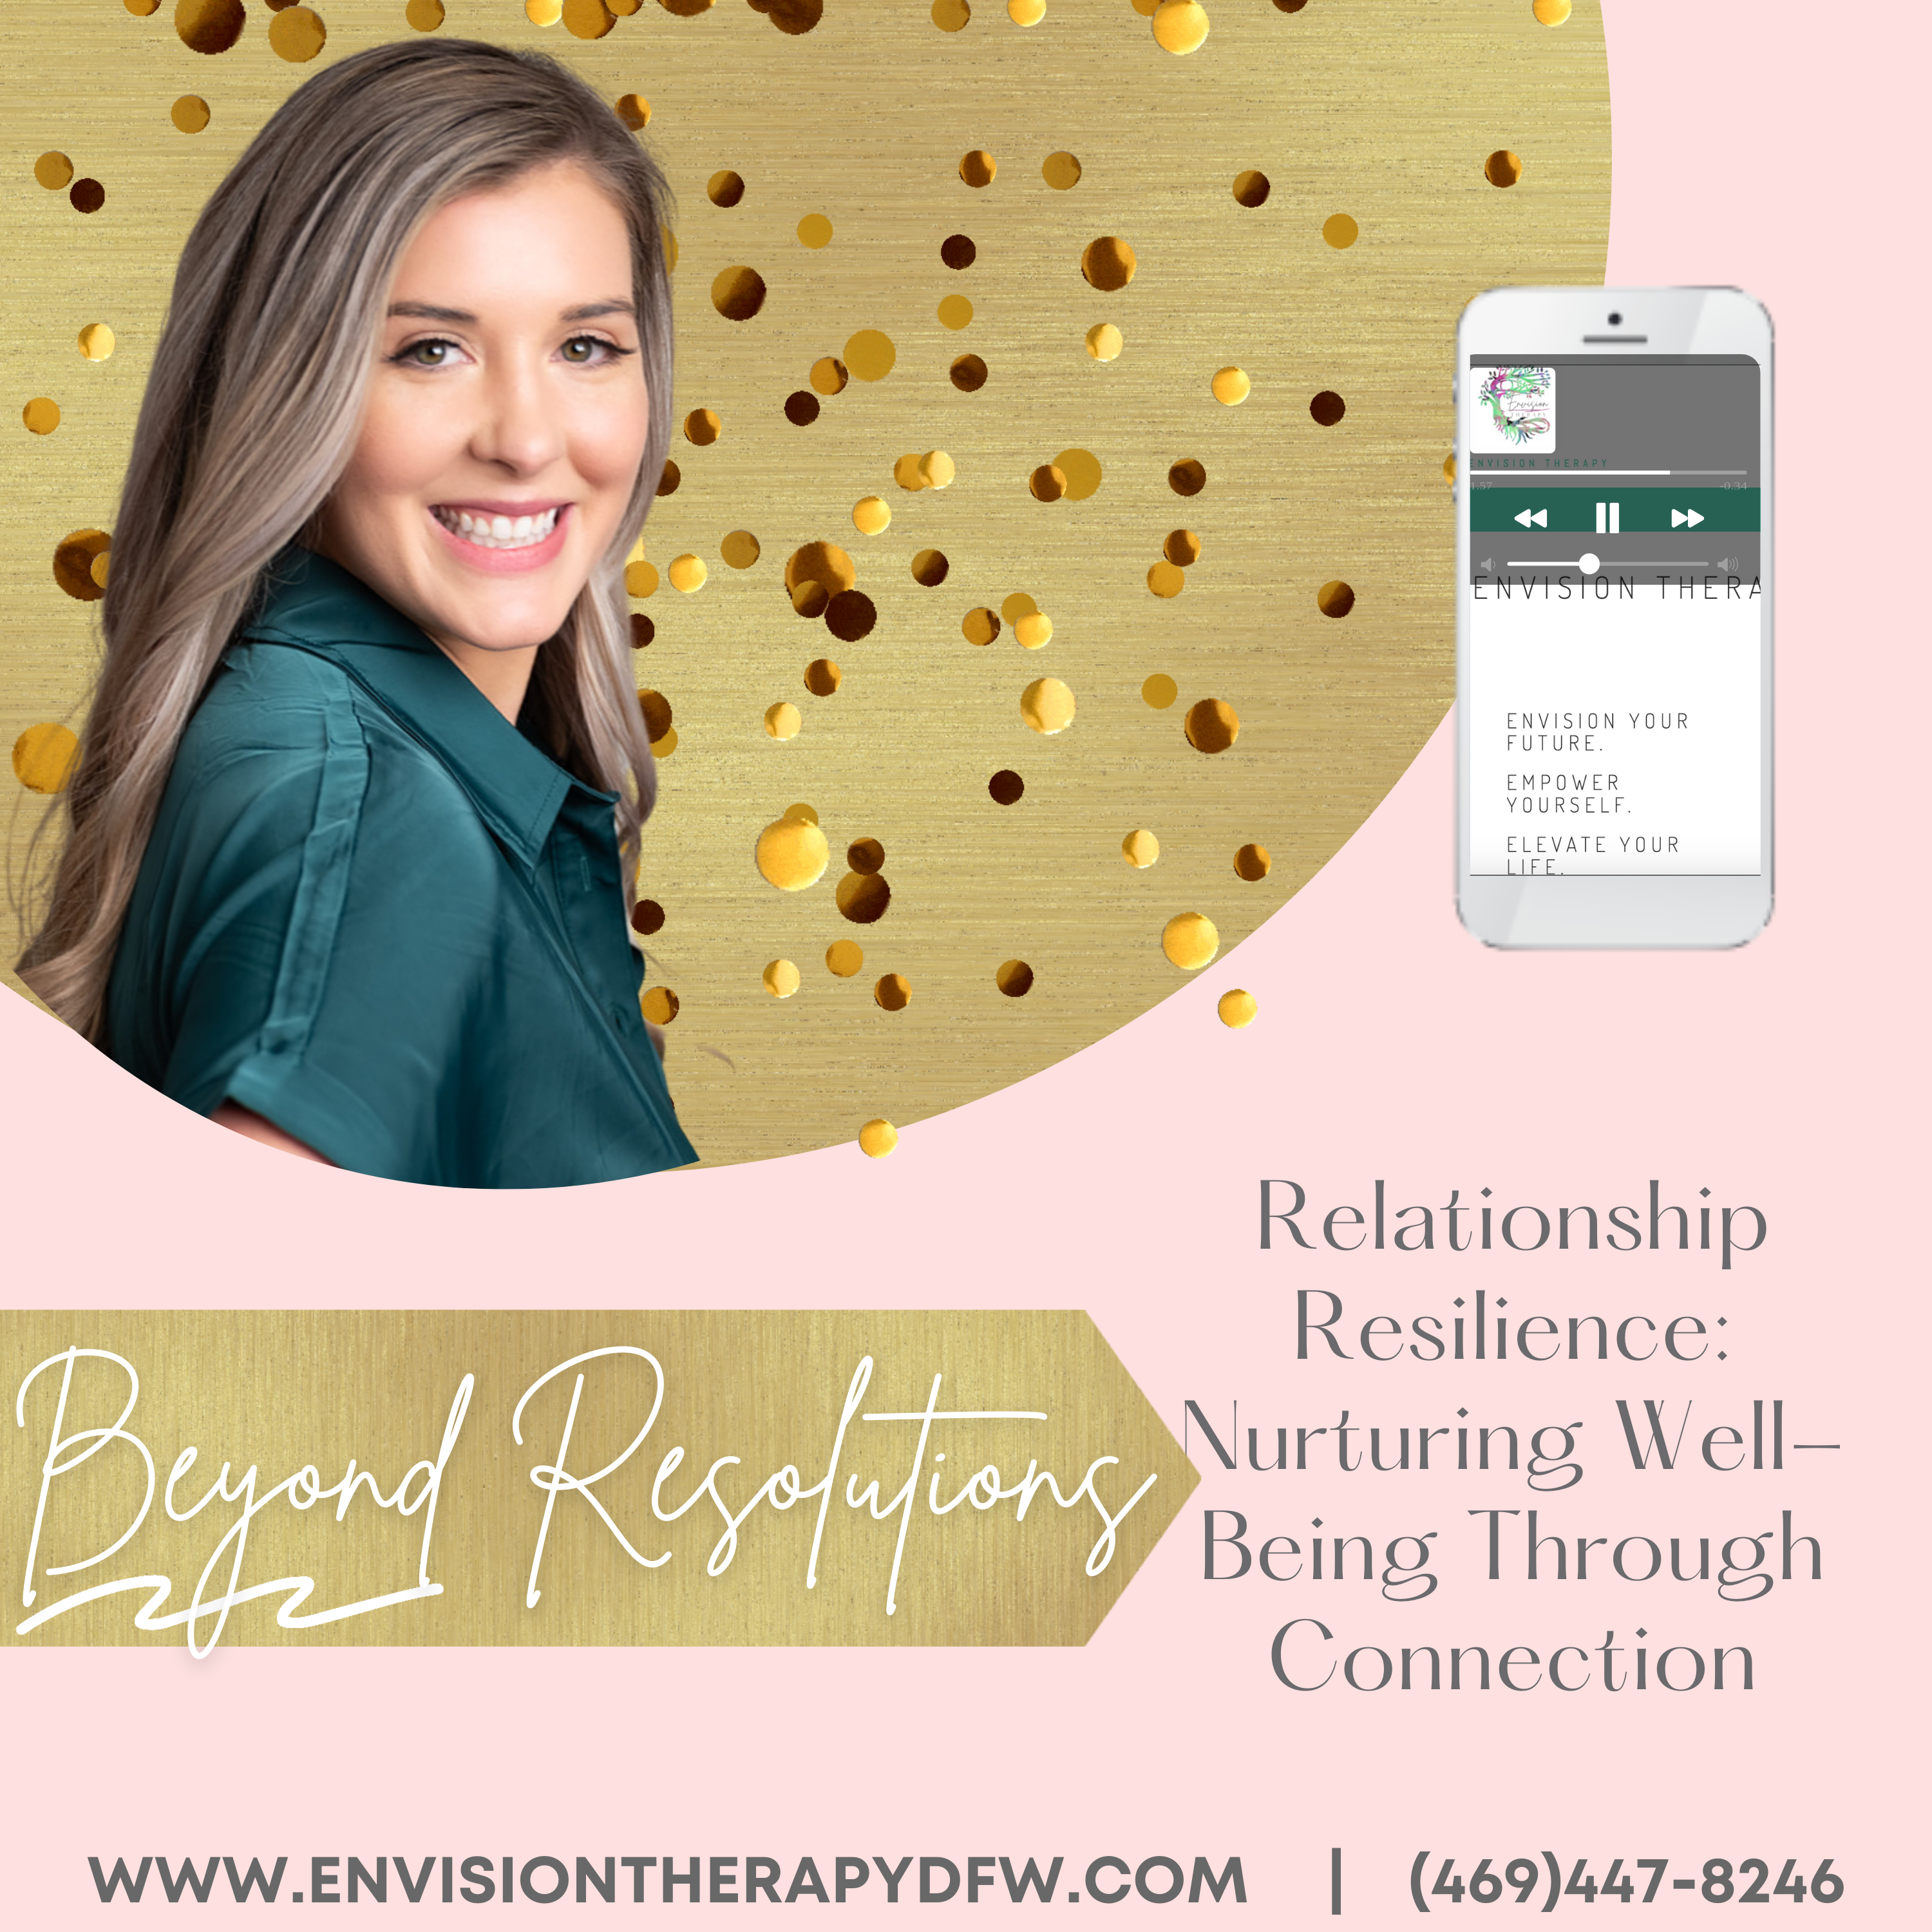 healthy relationships, communication, empathy, boundaries, conflict resolution, emotional intimacy, trust-building, time investment, well-being, relationship resilience